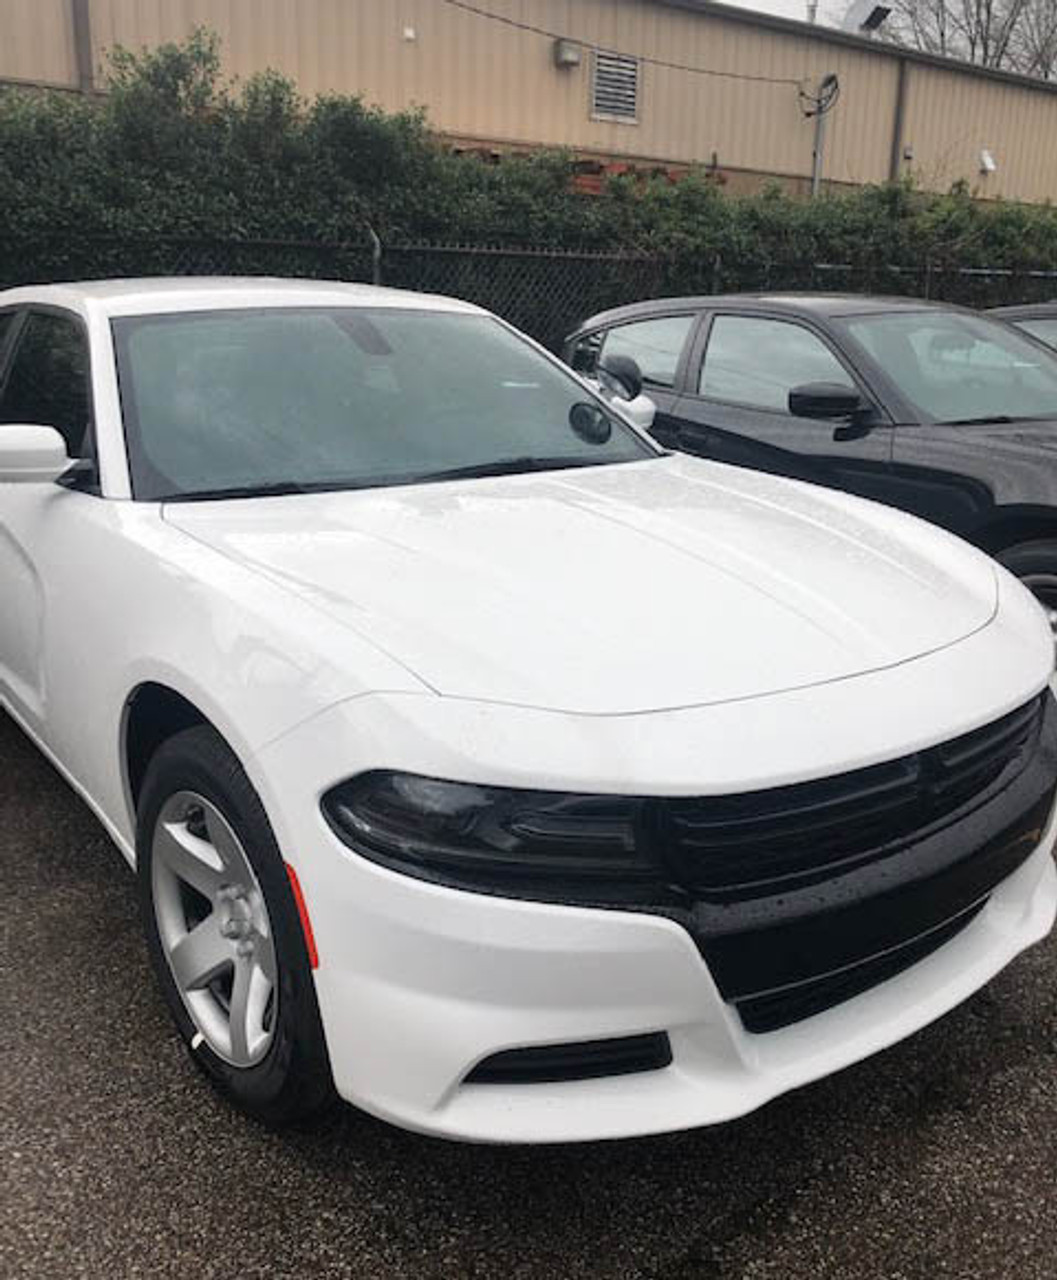 New 2023 White Dodge Charger PPV V8 RWD ready to be built as a Marked Patrol Package Police Pursuit Car (Emergency Lighting, Siren, Controller, Partition, Window Bars, etc.), WCM2, + Delivery